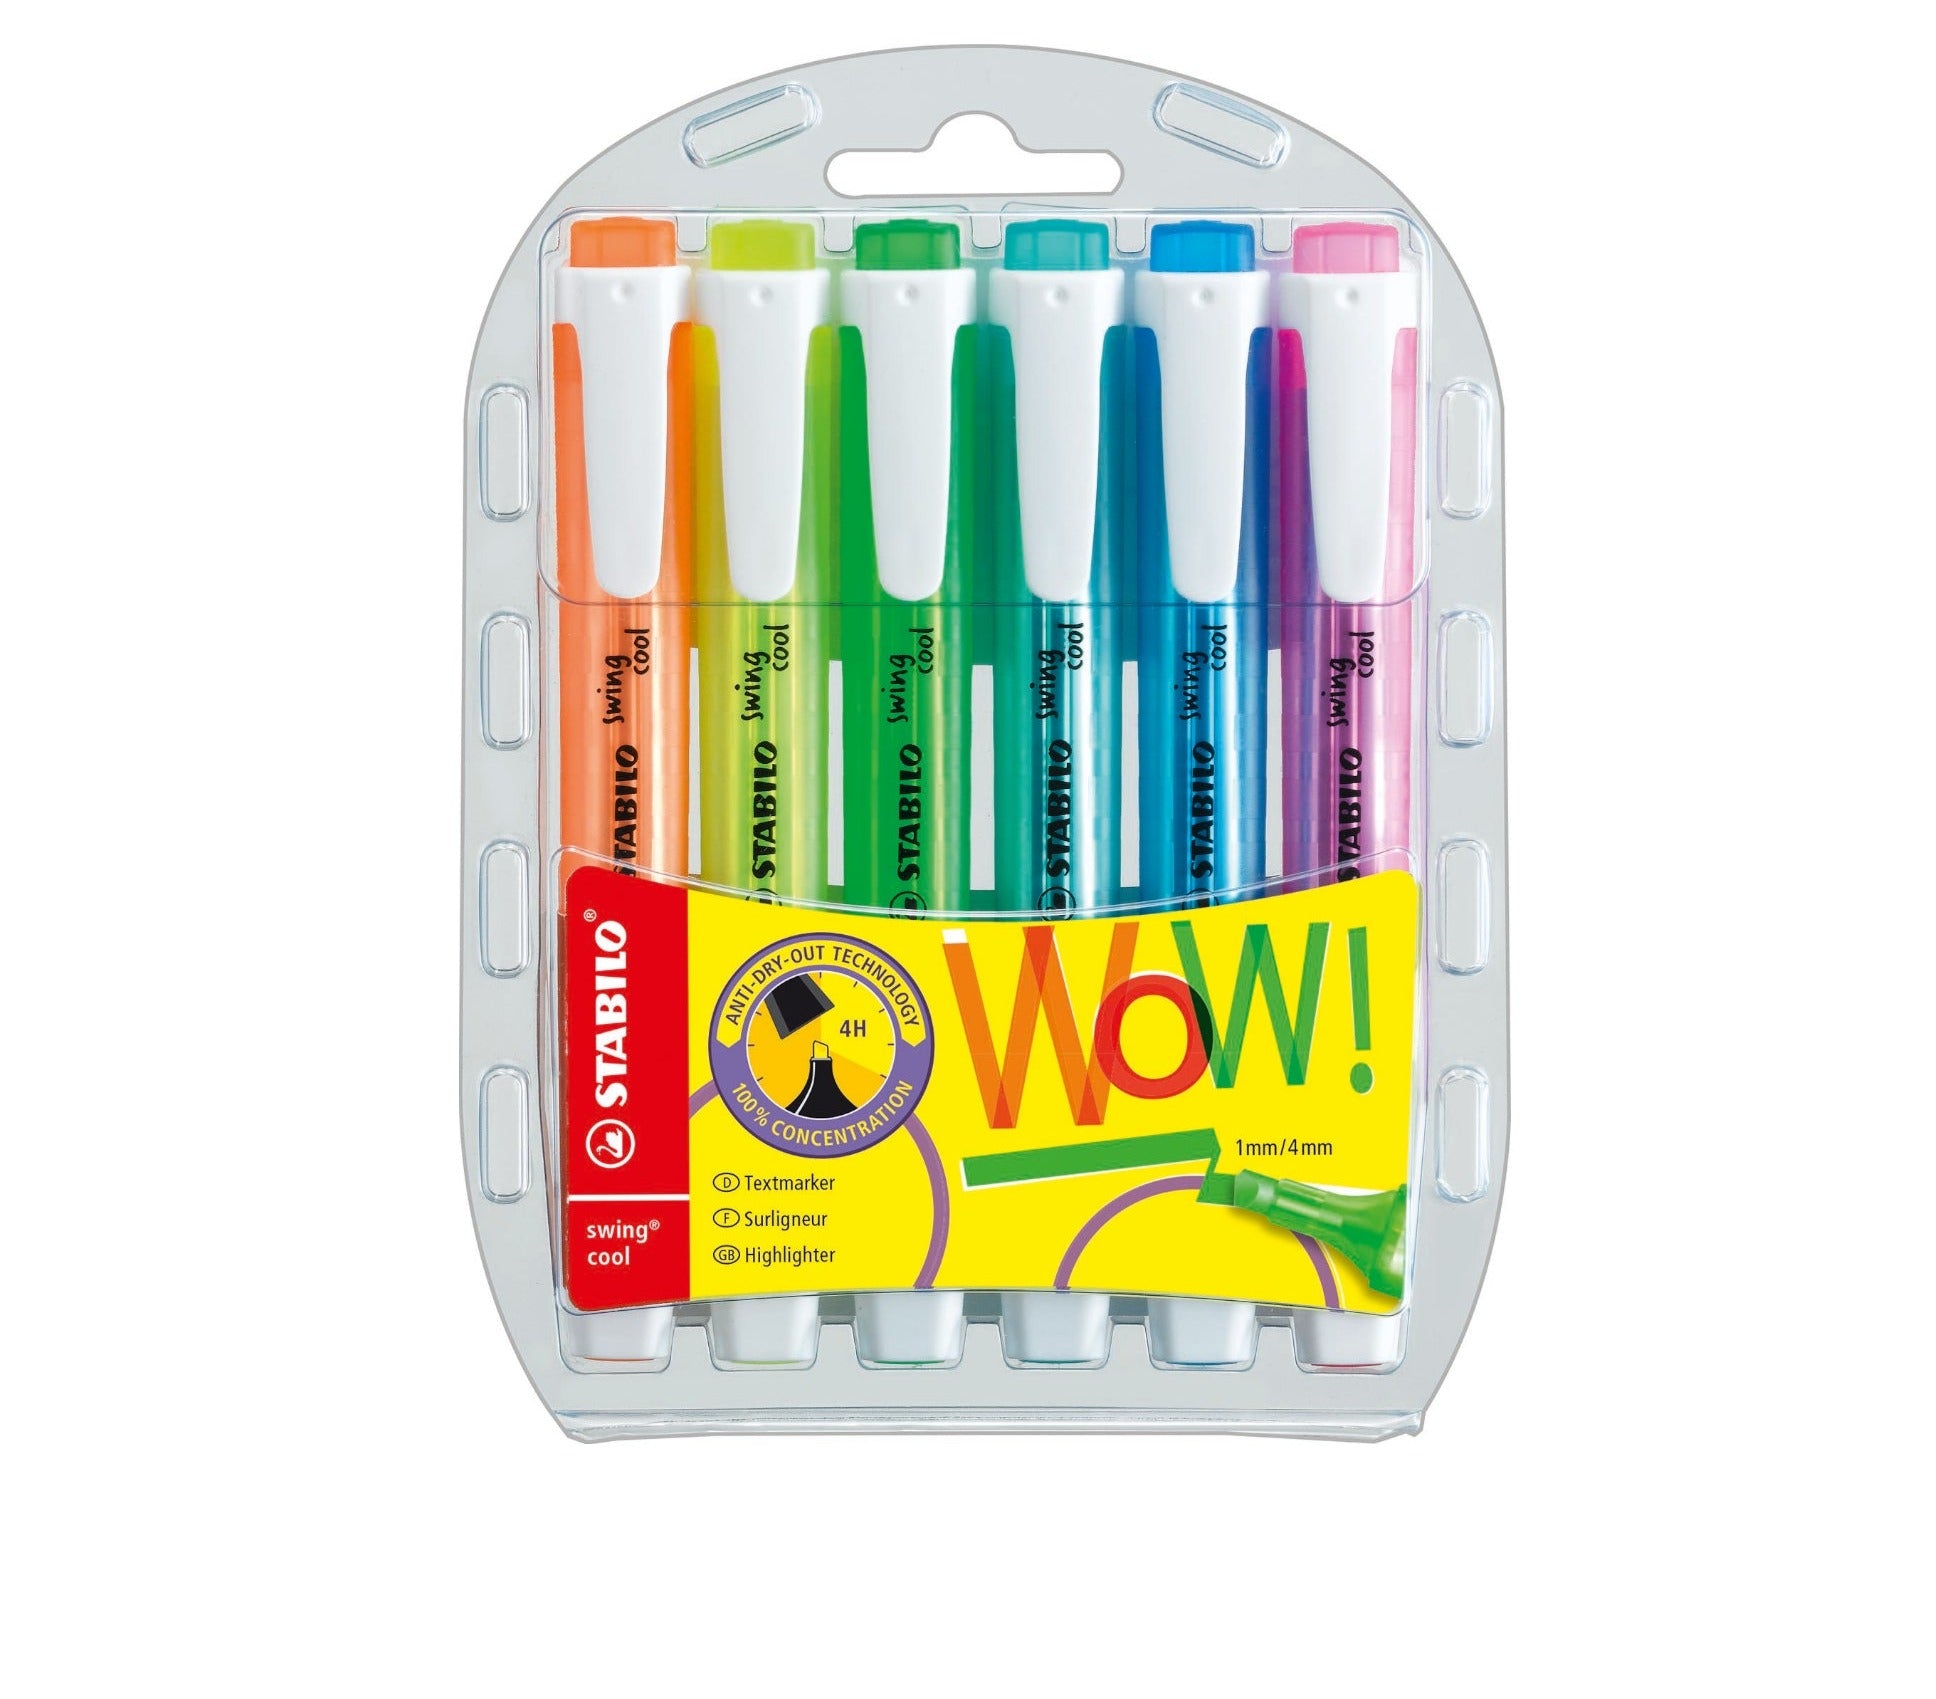 STABILO Swing Cool Highlighter - Set of 6 - Schwan-STABILO -Most colourful Stationery Shop